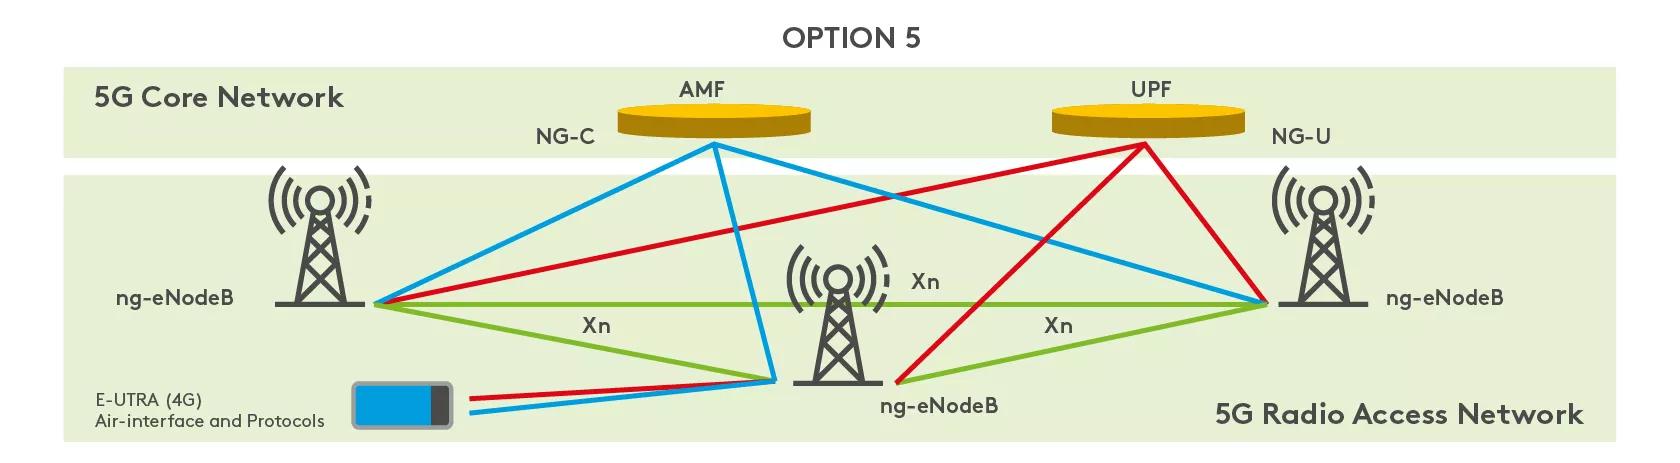 5G core network and 5G radio access network